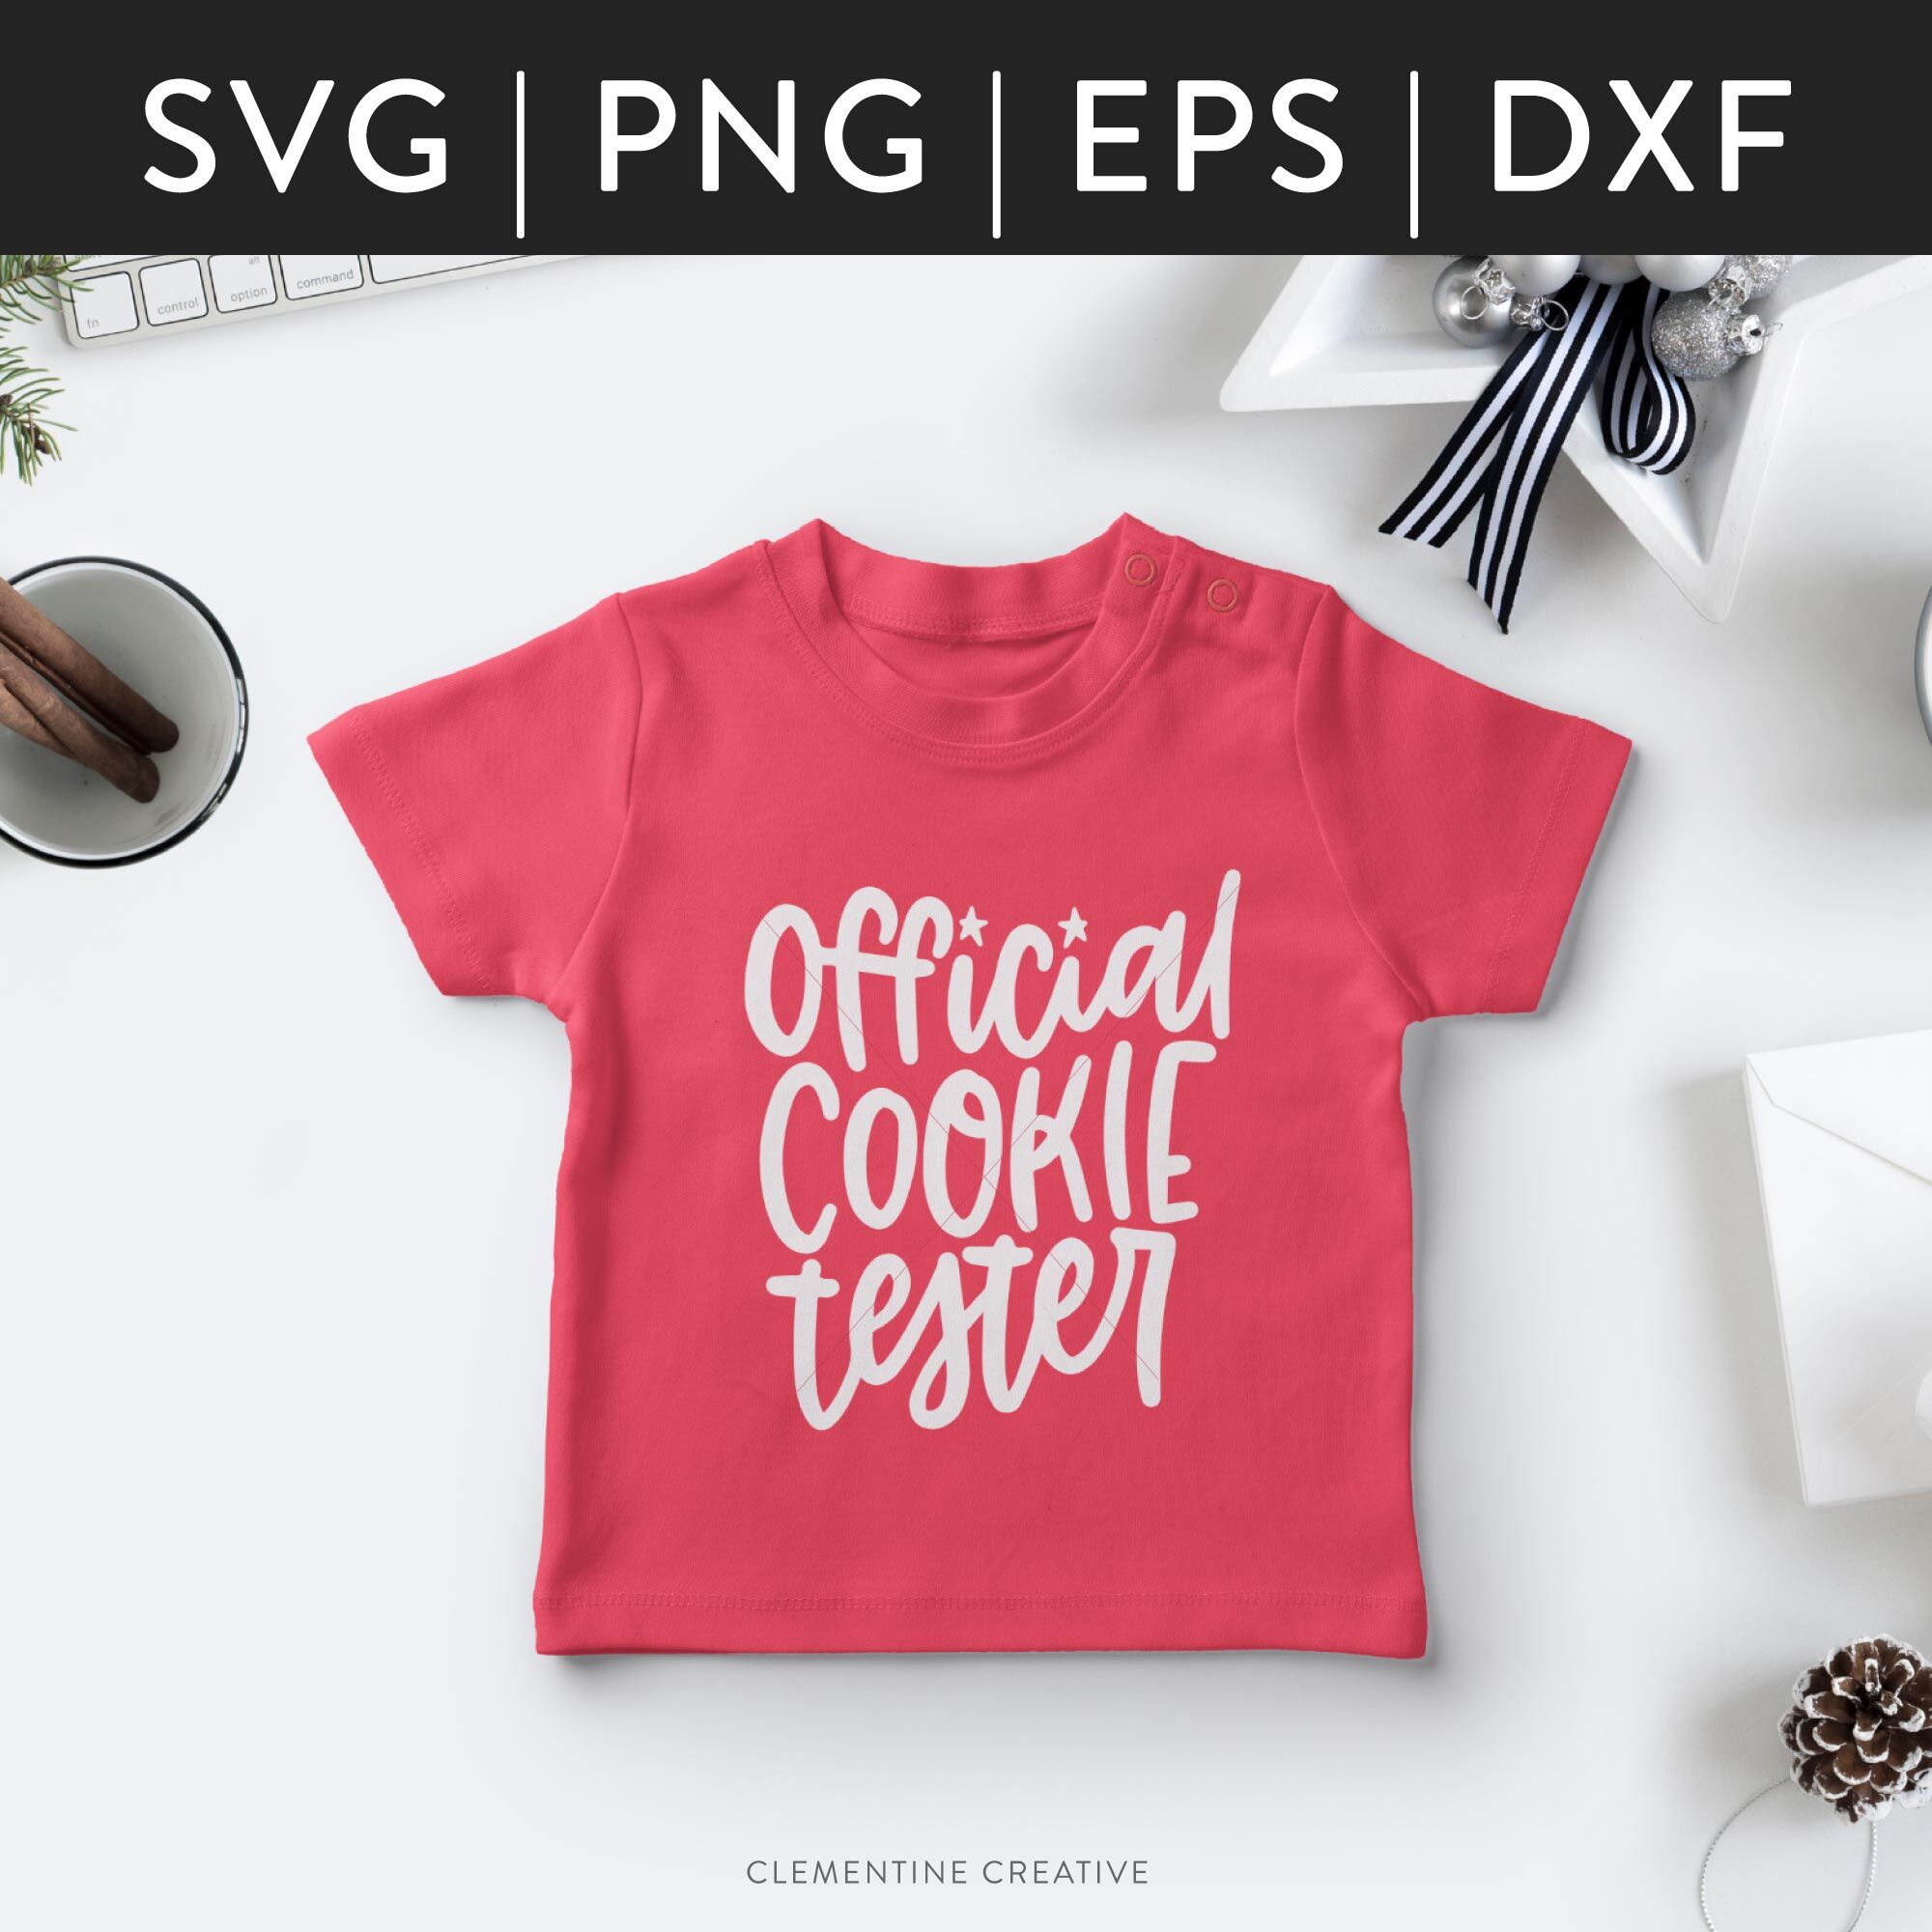 Download Christmas Shirt Svg Official Cookie Tester Svg Christmas Baking Sv By Clementine Creative Thehungryjpeg Com